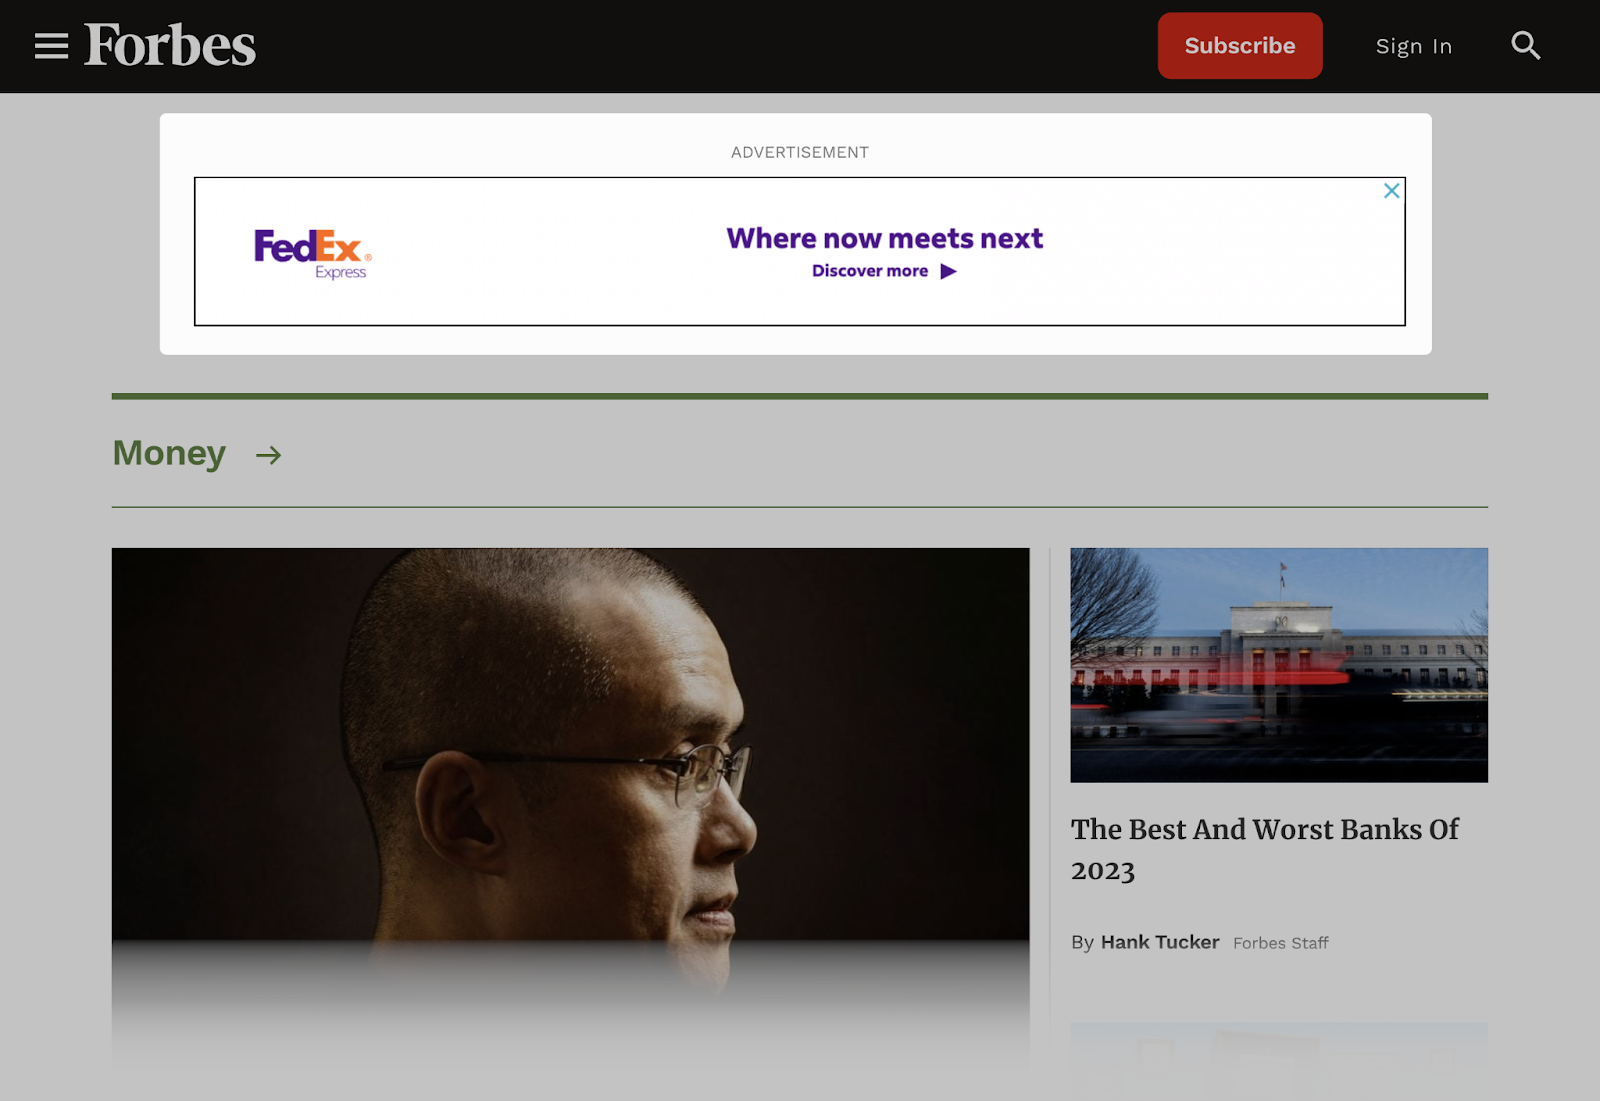 FedEx ad showing on Forbes' website